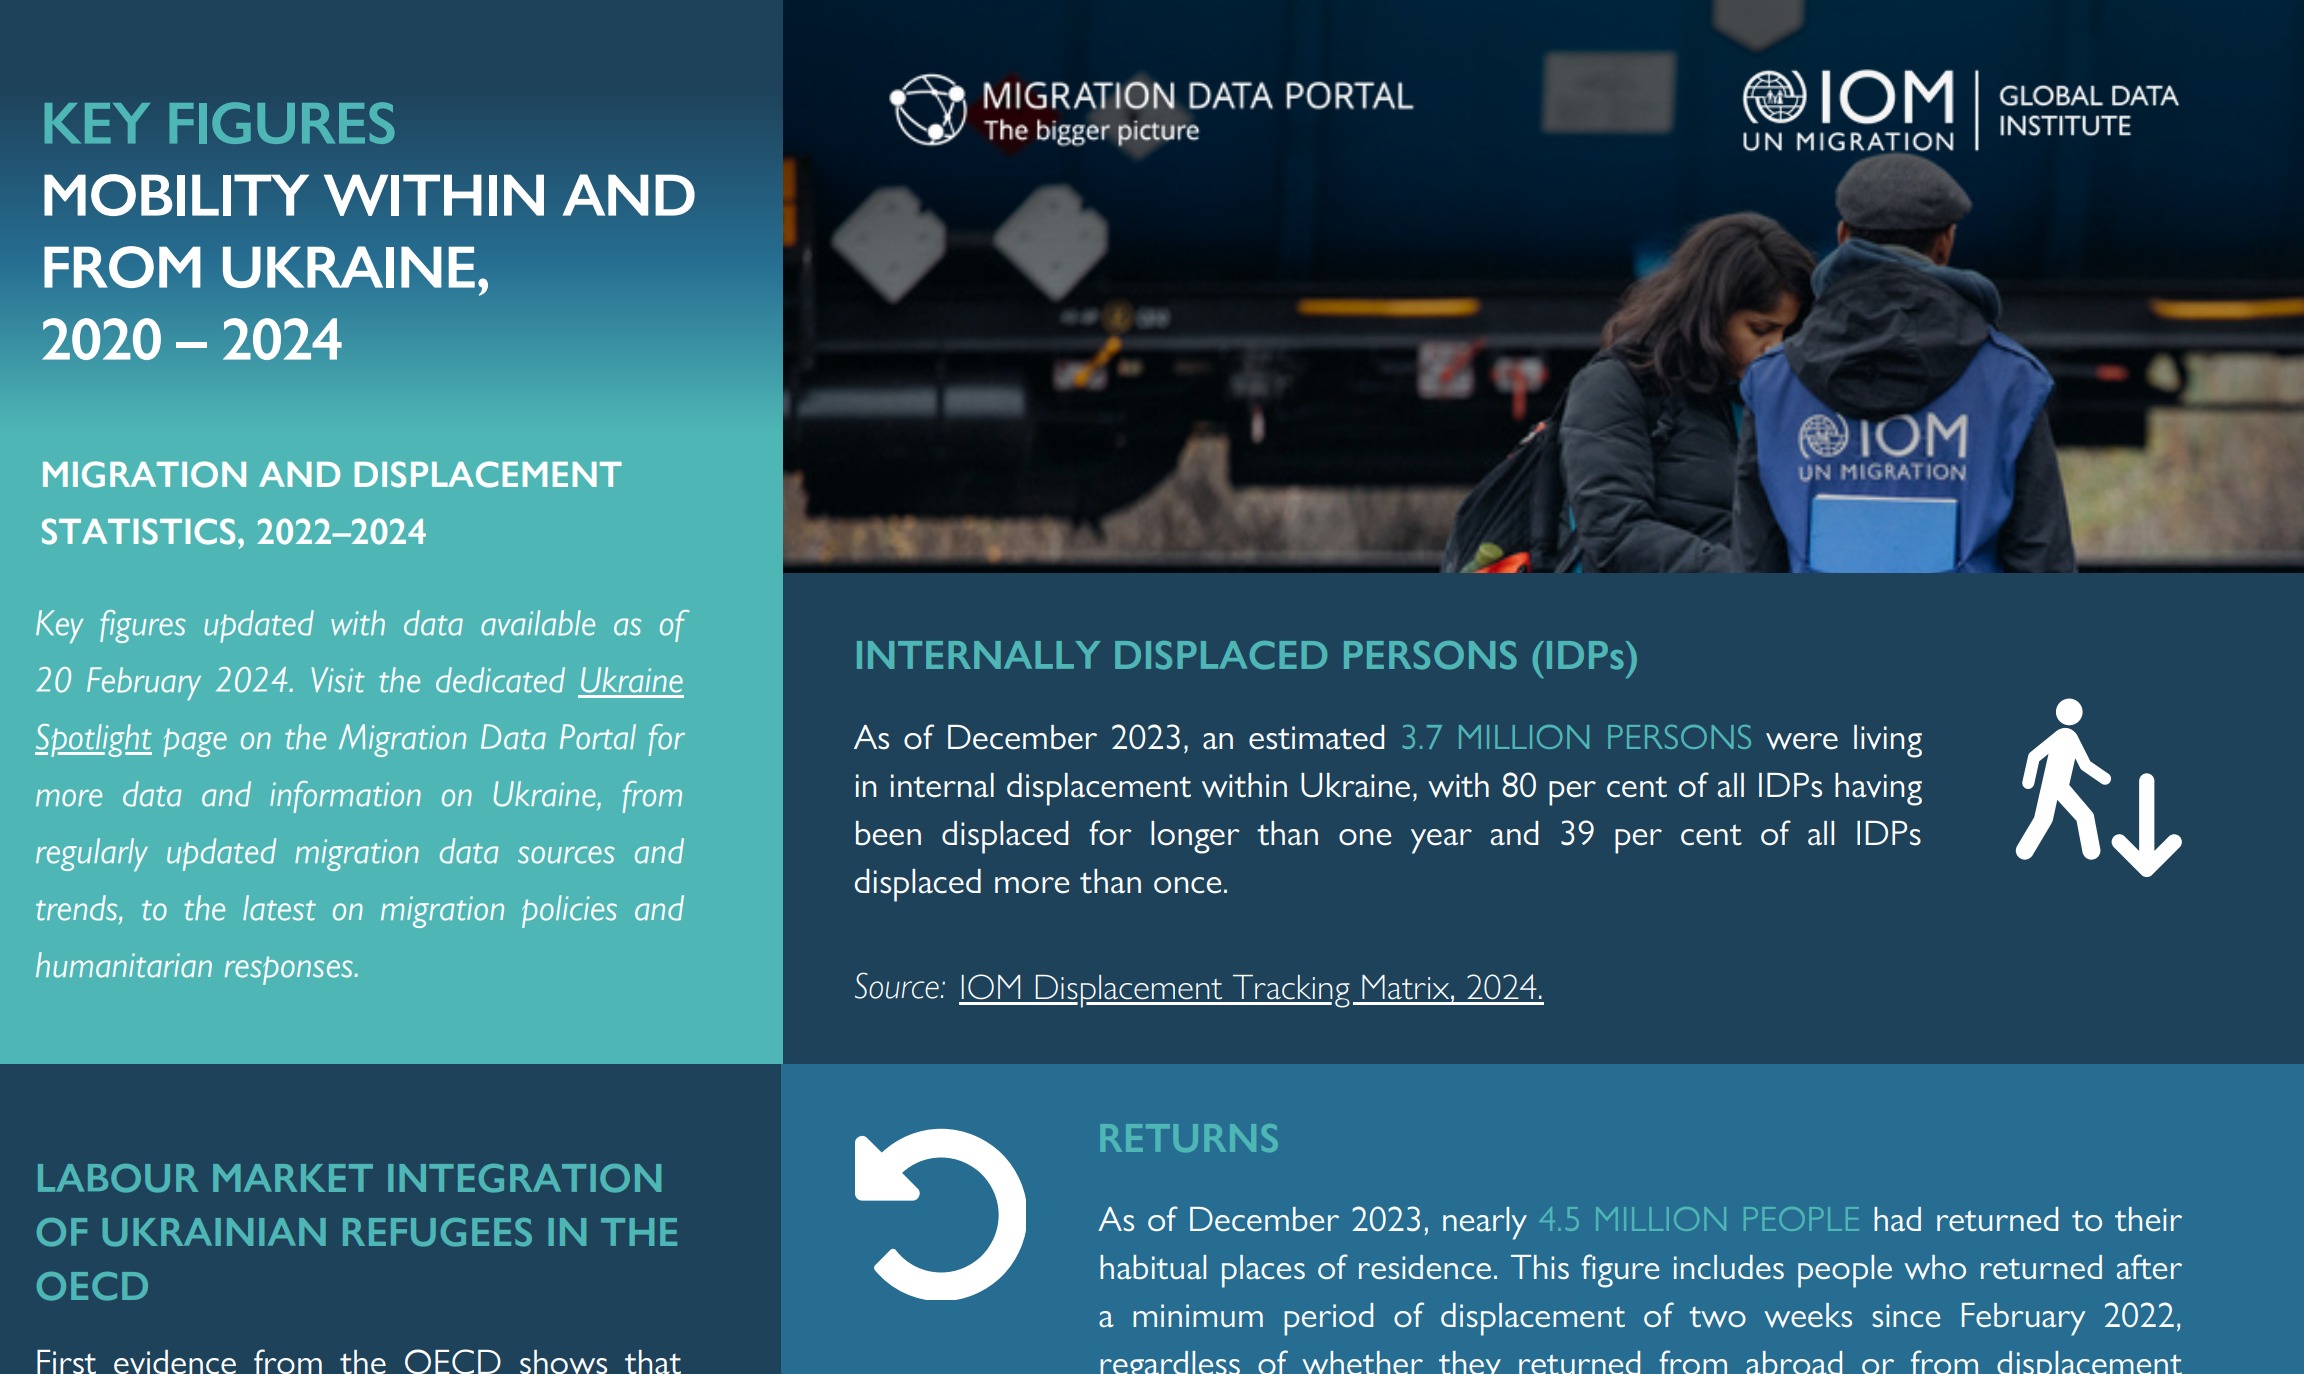 IOM Global Data Institute on X: Out Now! 📊Updated key figures on mobility  within and from Ukraine are available on the Migration Data Portal! Visit  the Portal 👇   / X